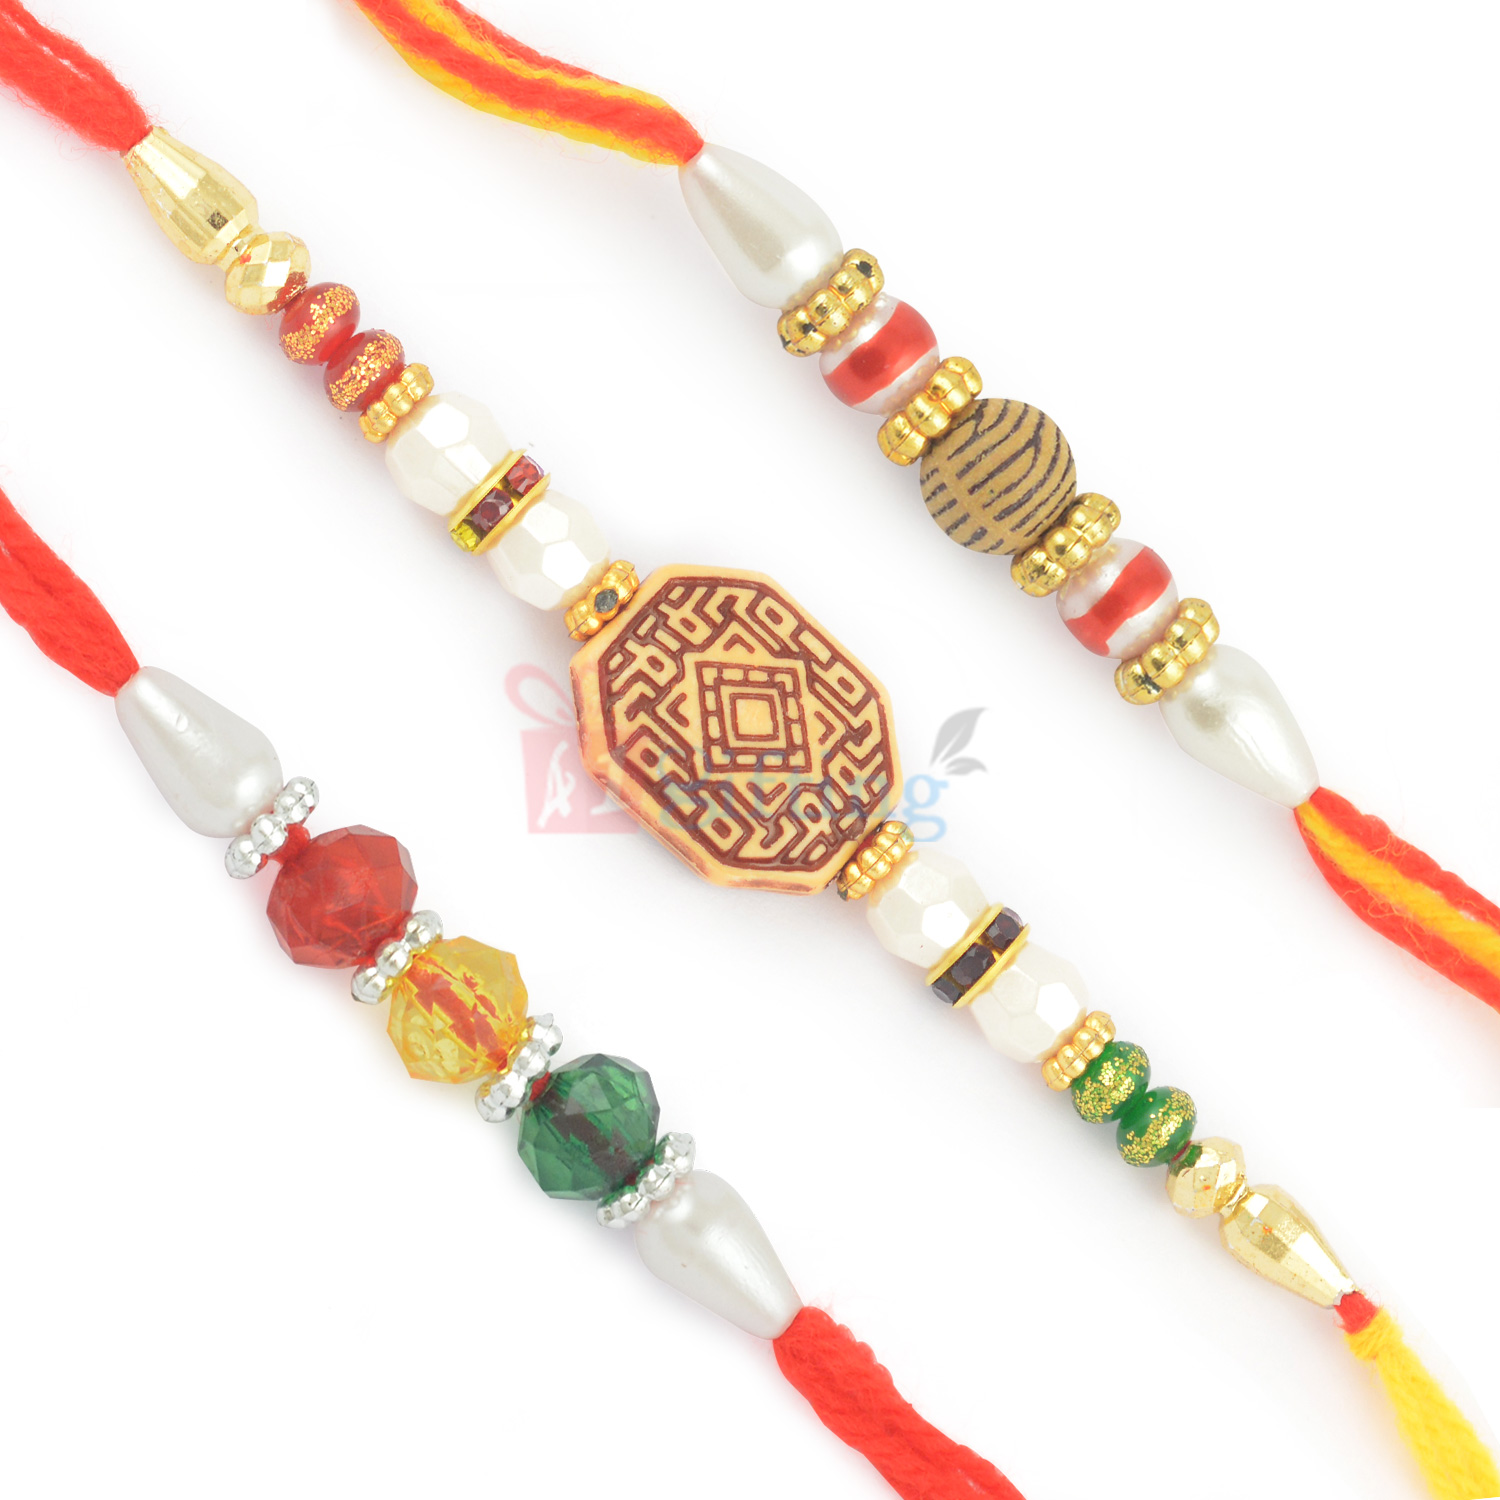 Staggering Pearl and Glass Beads 3 Rakhi Set for Brothers